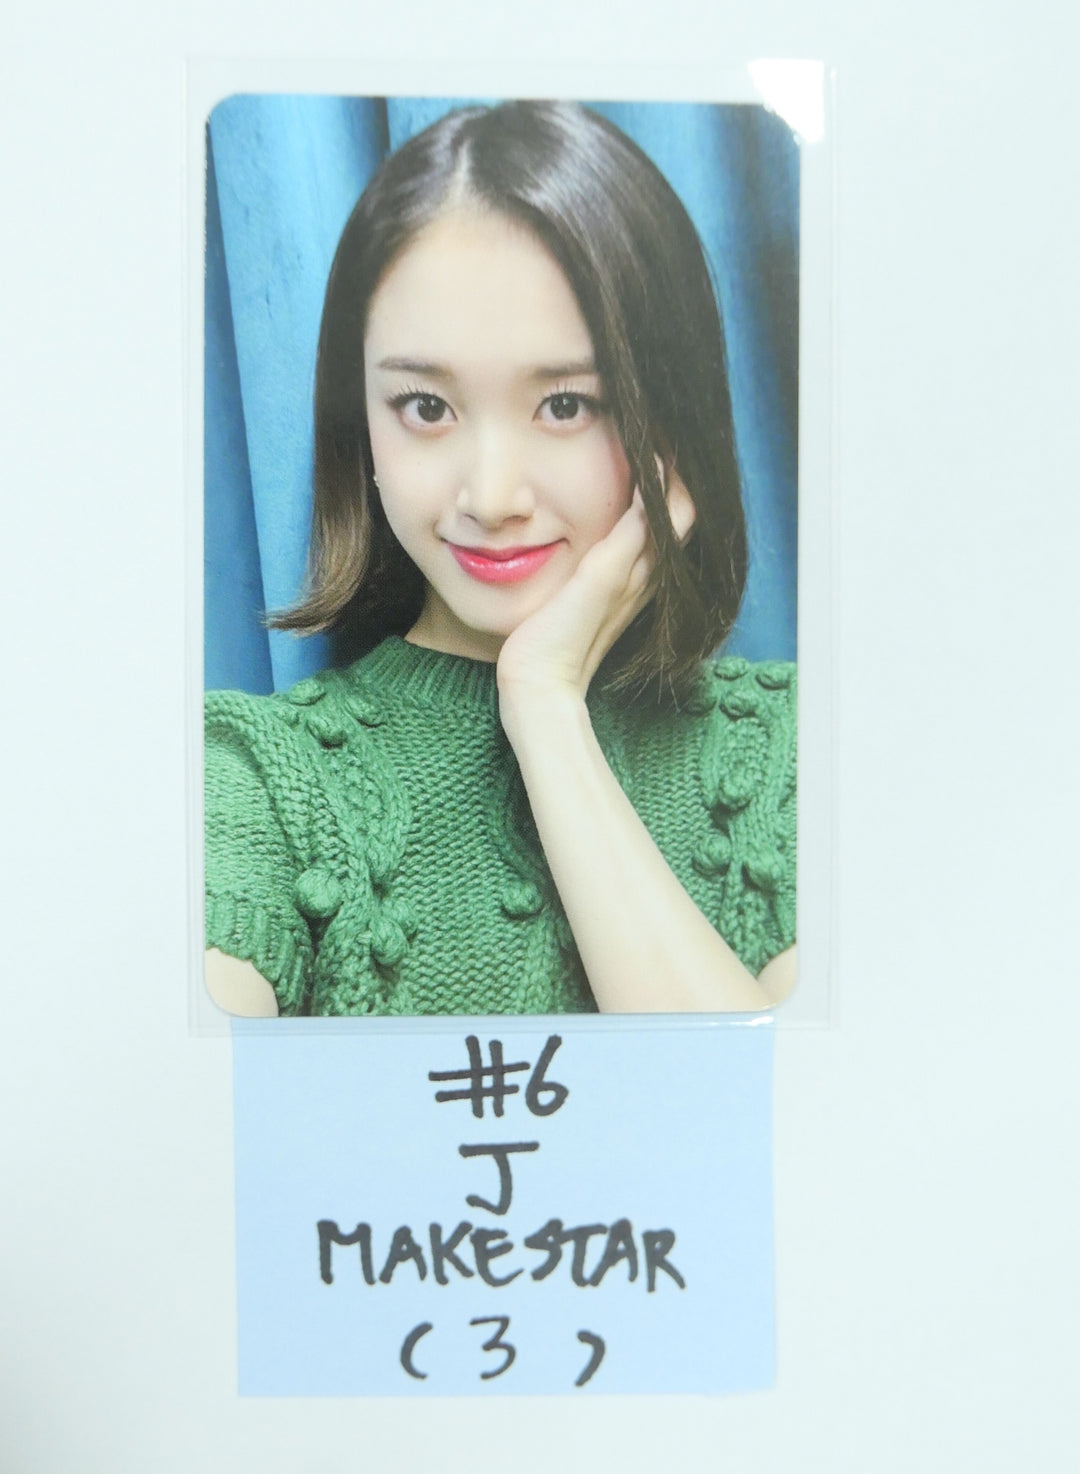 StayC 'YOUNG-LUV.COM' - MakeStar Fansign Event Photocard